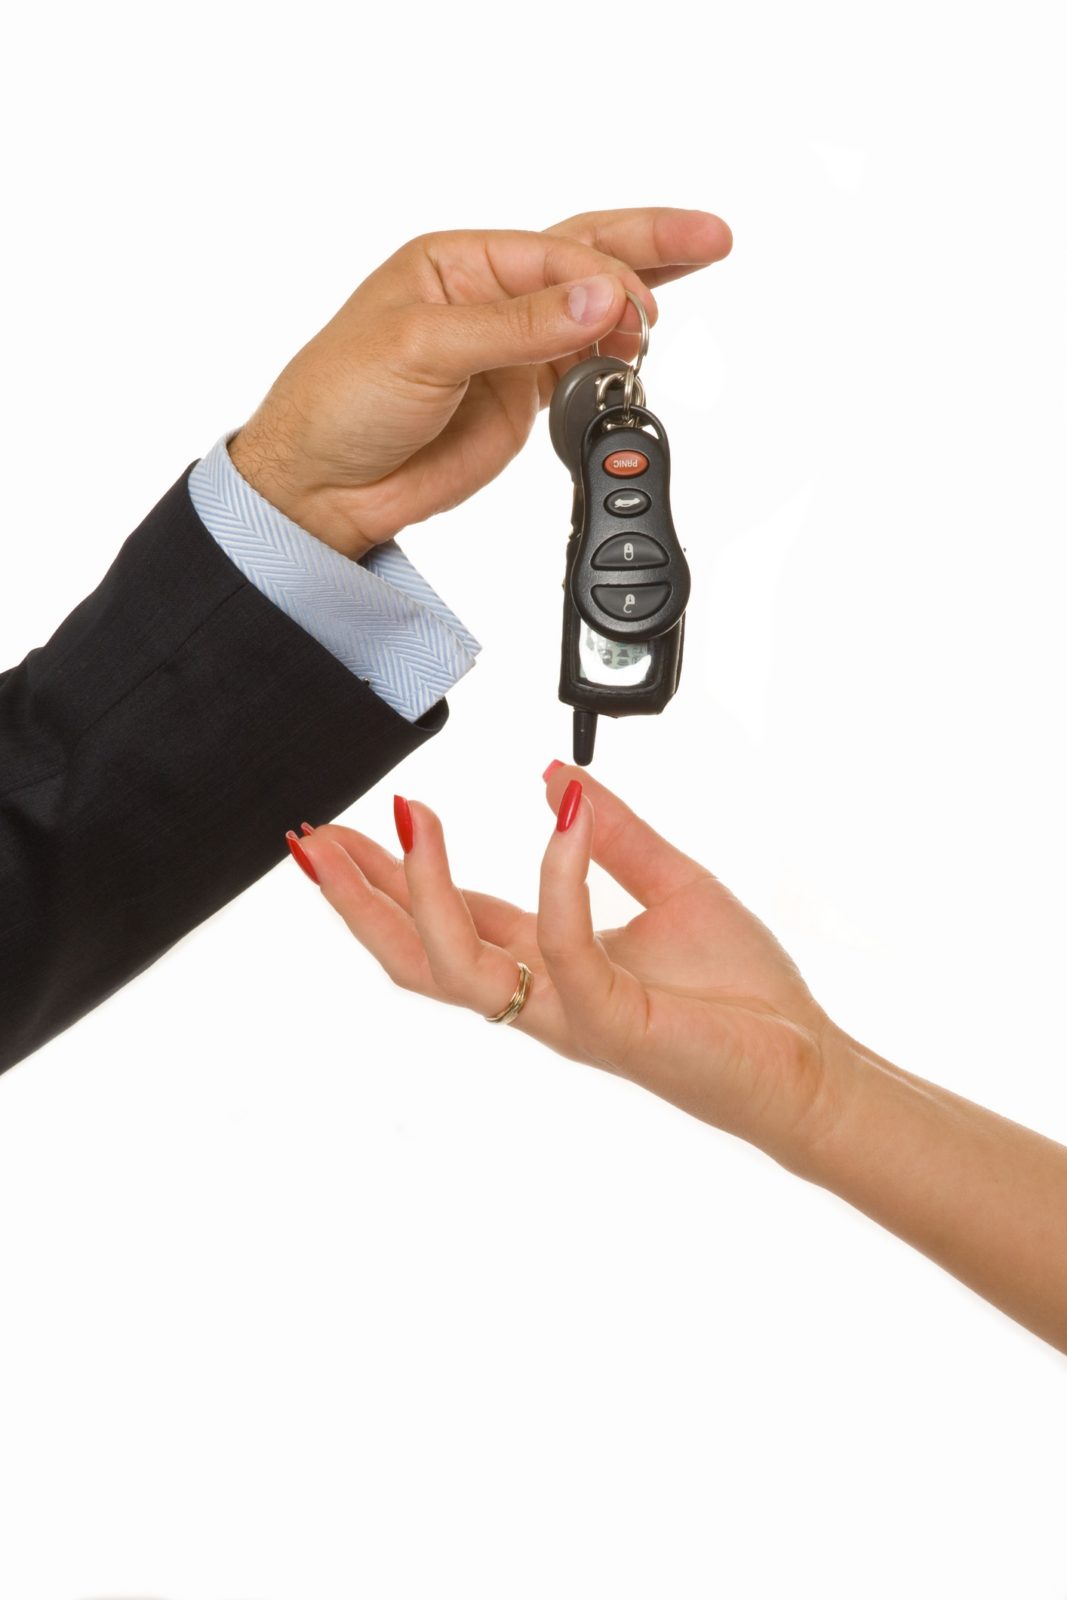 How To Help Your Loved One “Give Up The Keys” But Stay Independent